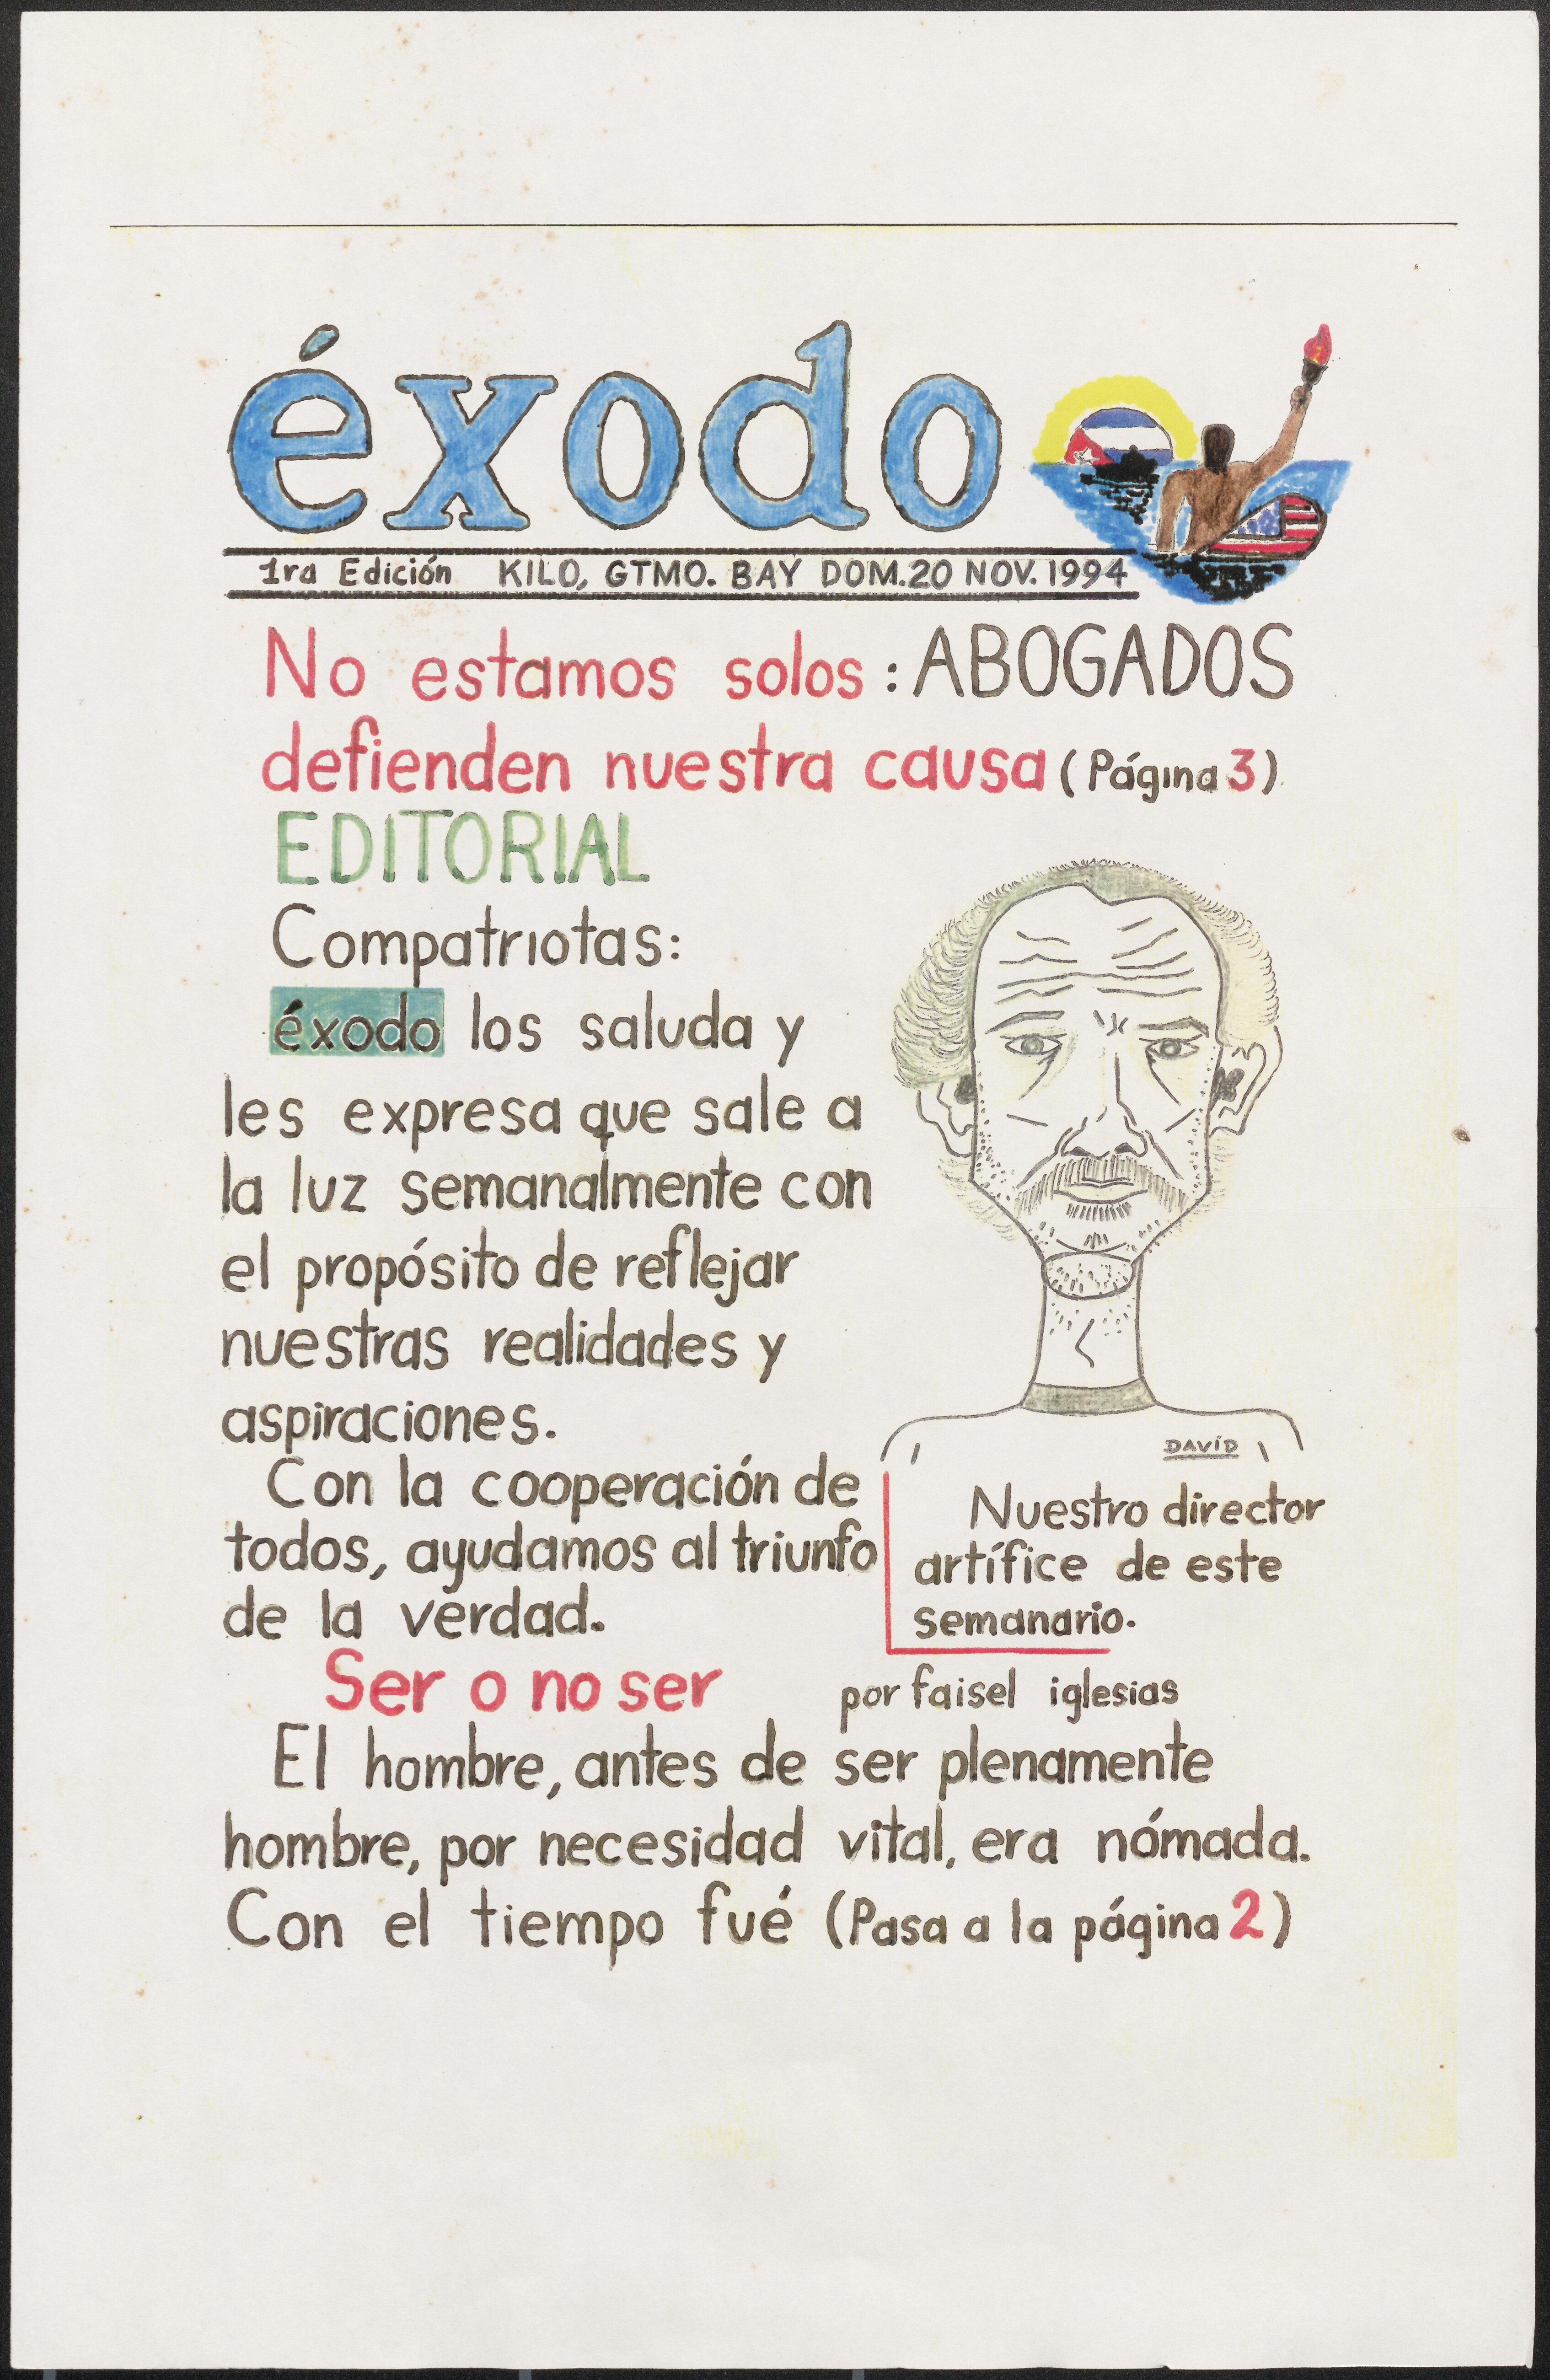 The front page of the first edition of éxodo